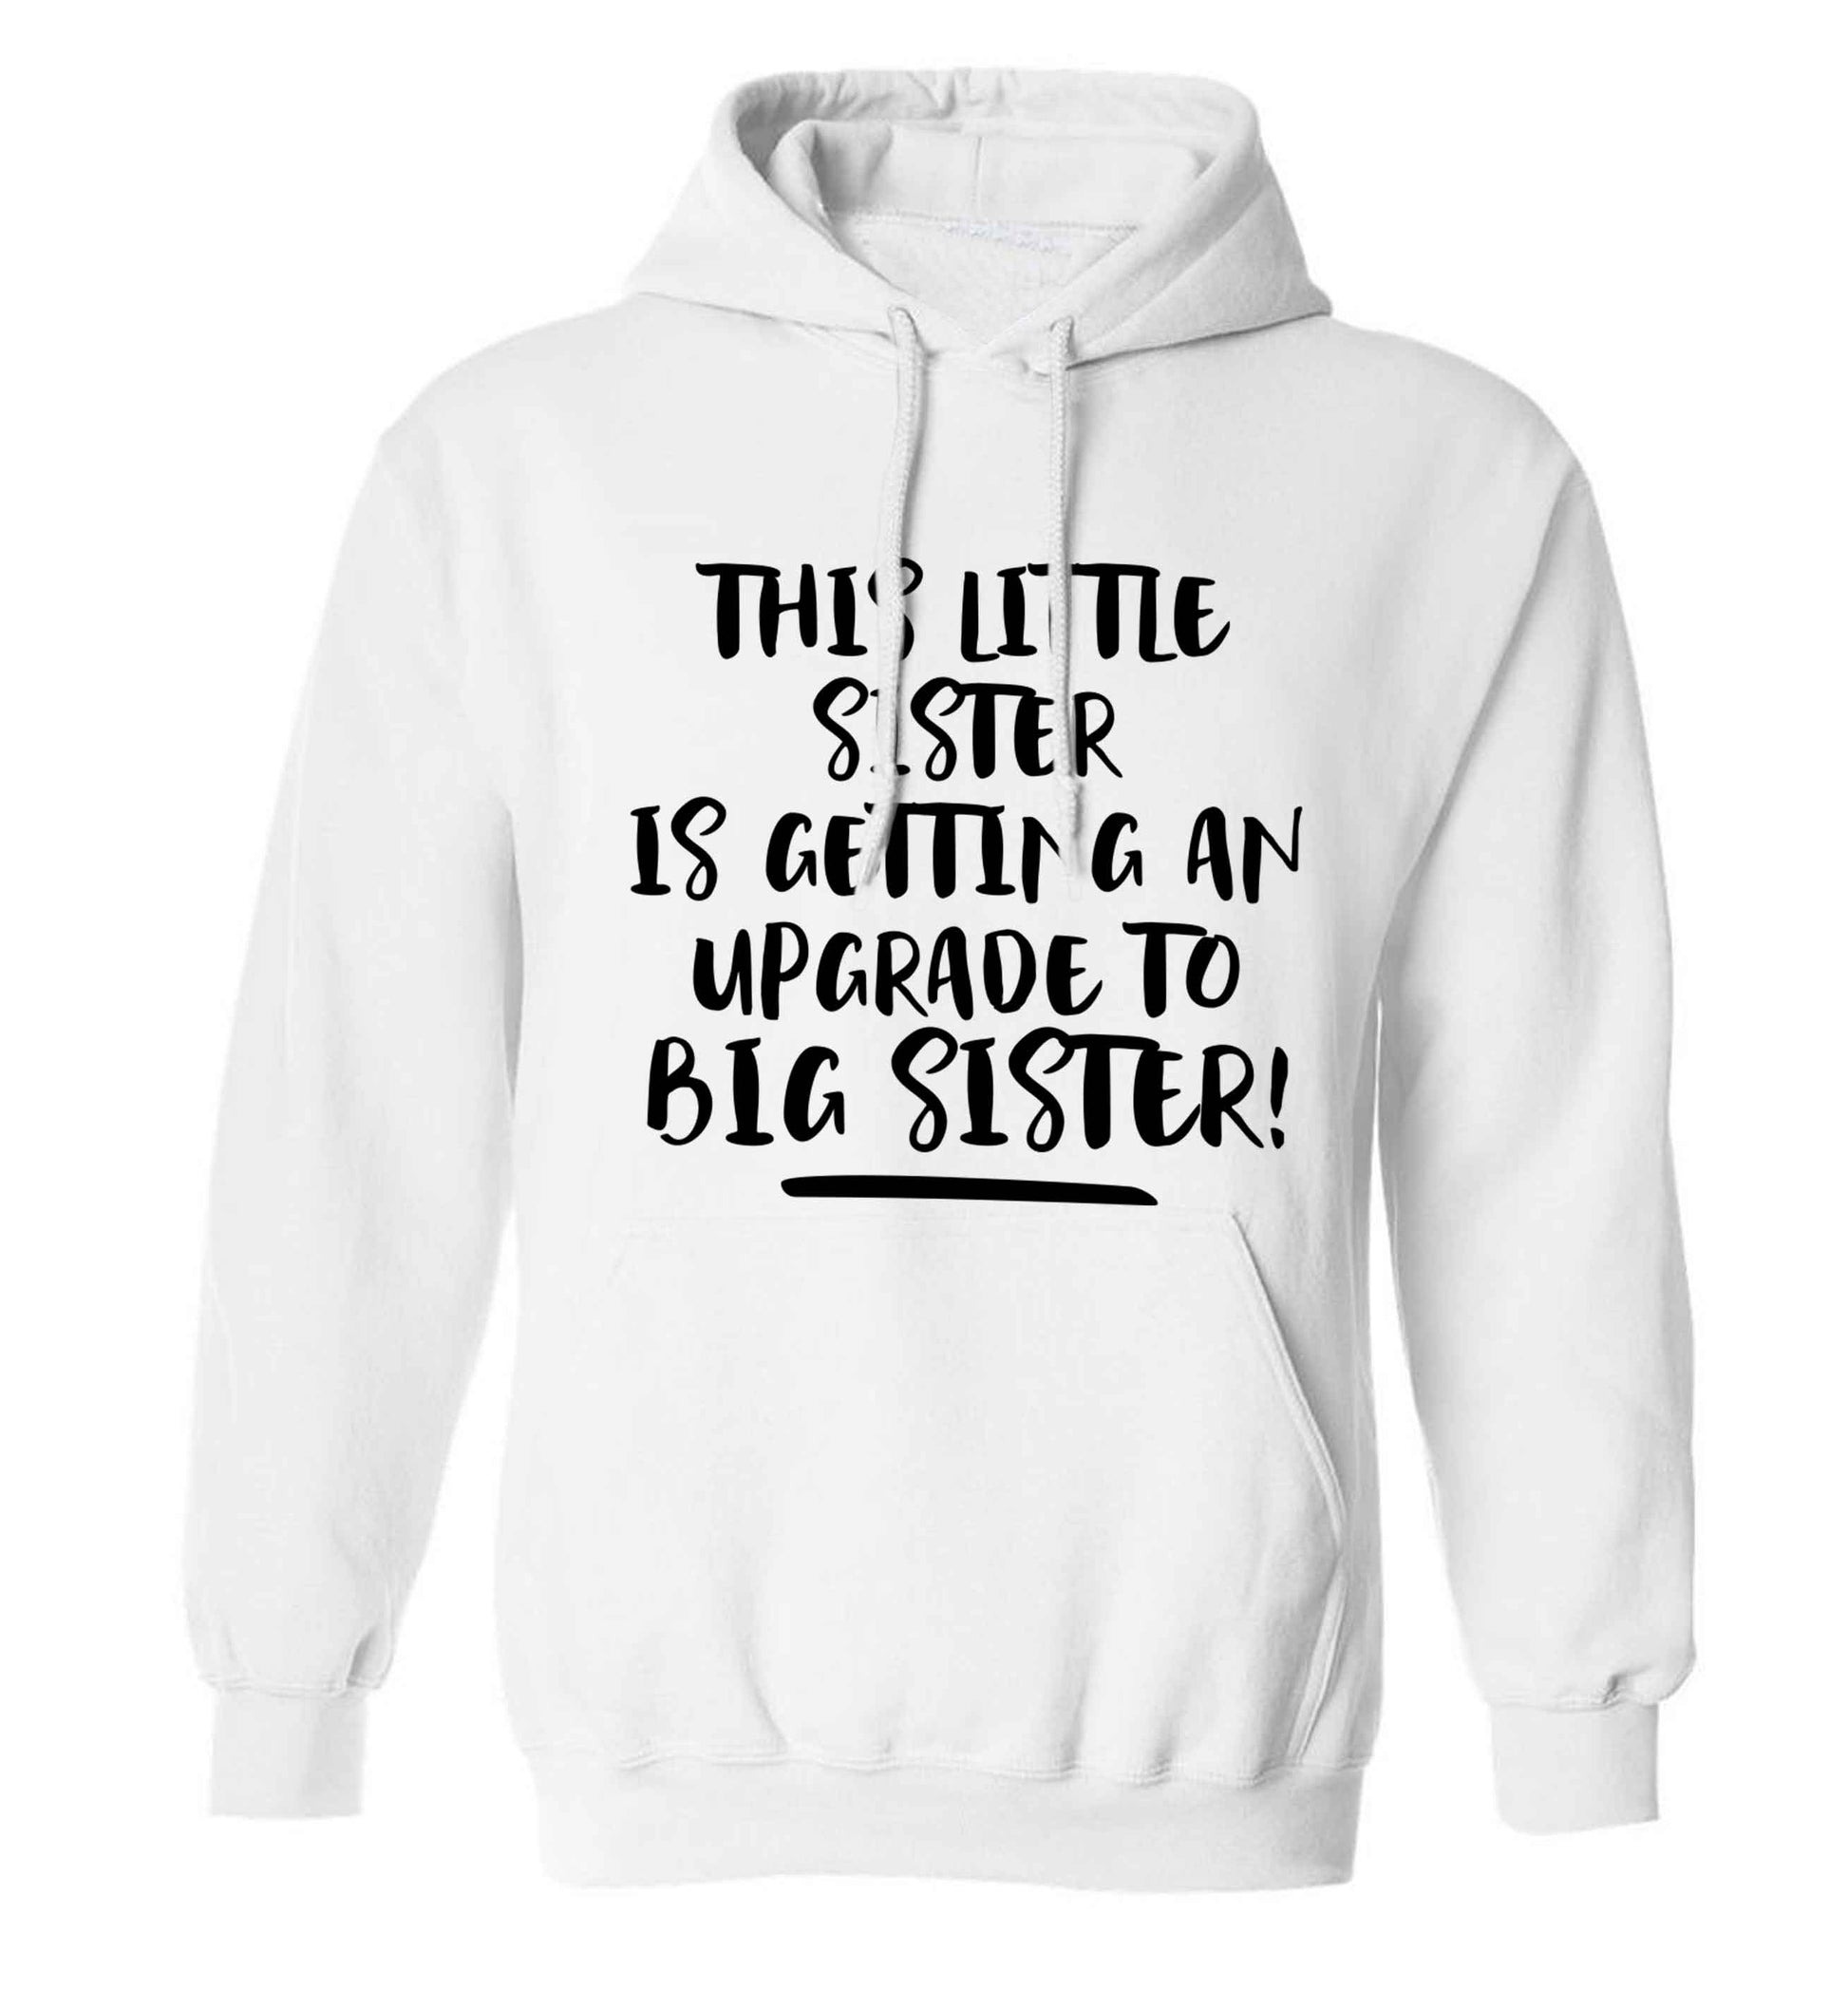 This little sister is getting an upgrade to big sister! adults unisex white hoodie 2XL